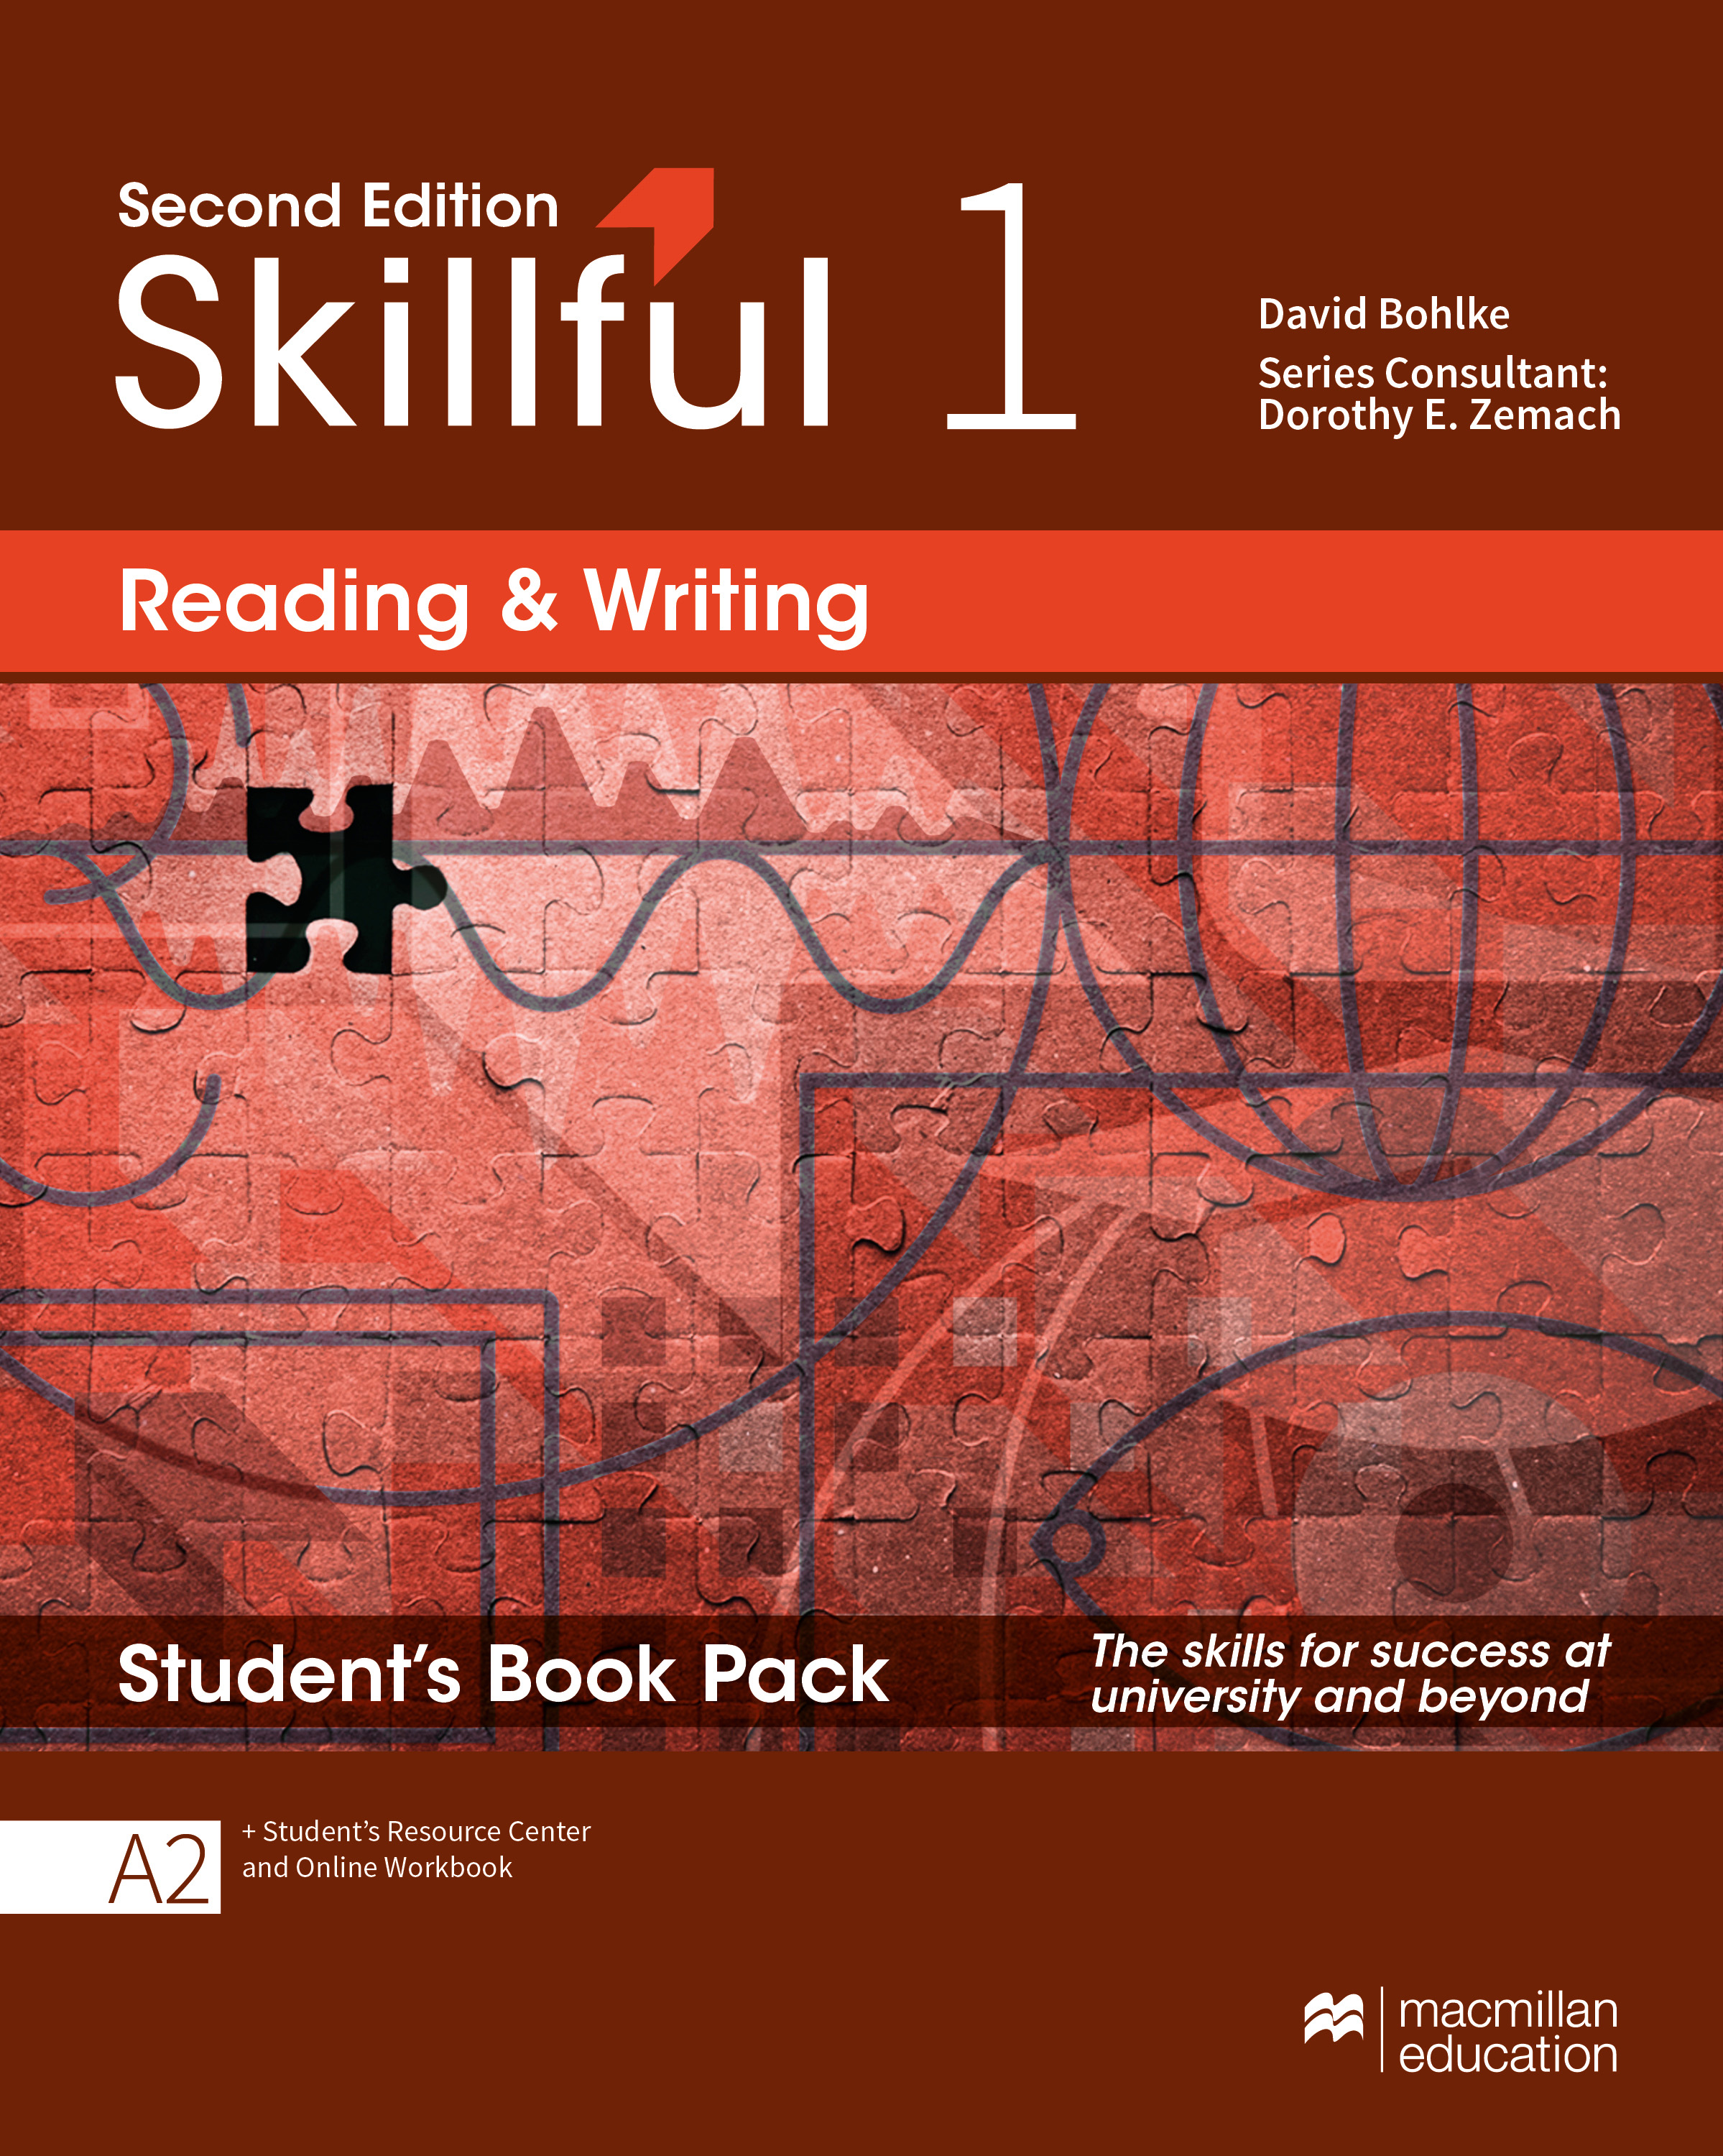 Skillful 2. Skillful 1 reading and writing. Skillful Macmillan. Skillful 1. Skillful reading and writing students book 1.